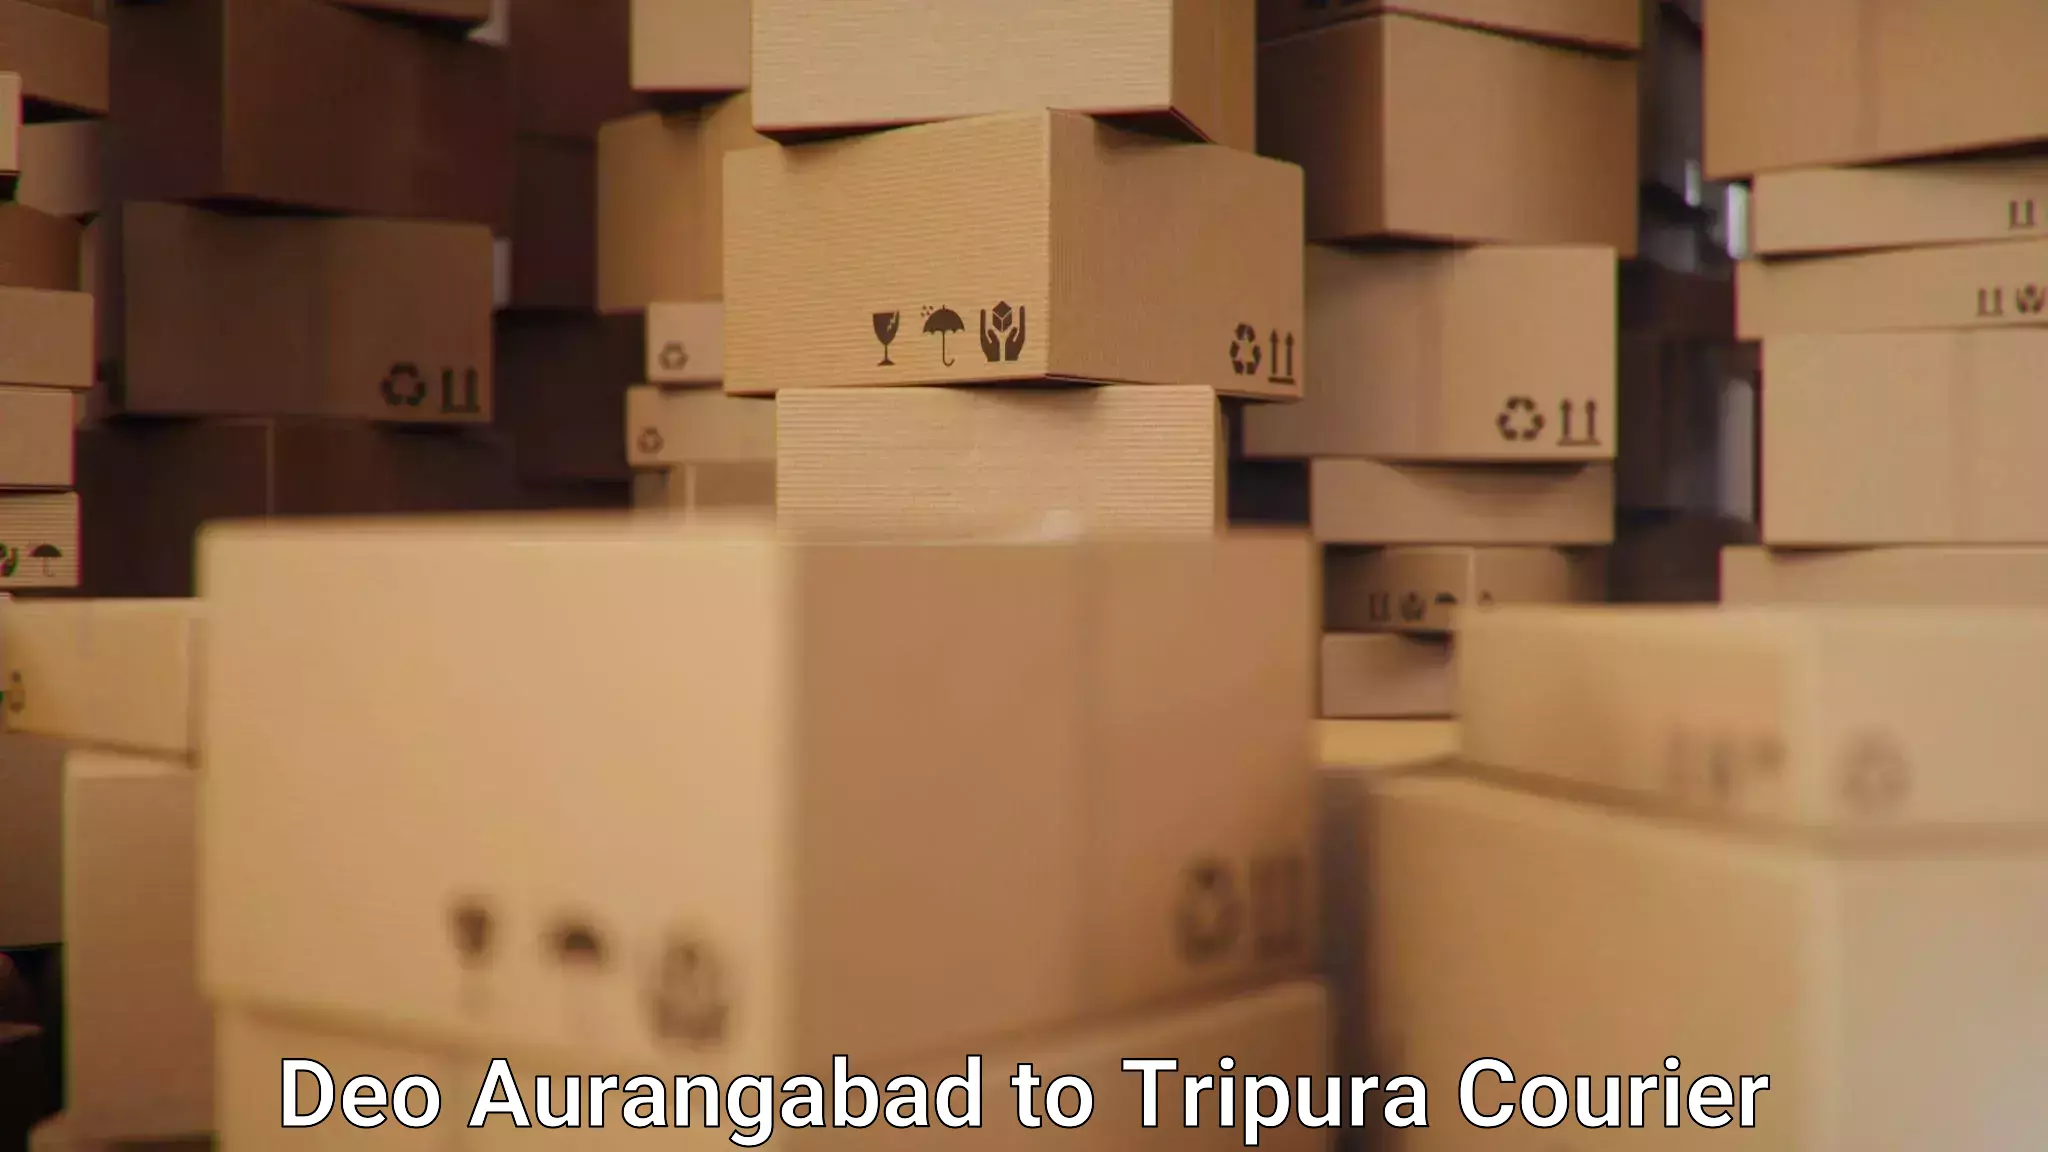 Flexible delivery schedules in Deo Aurangabad to Udaipur Tripura